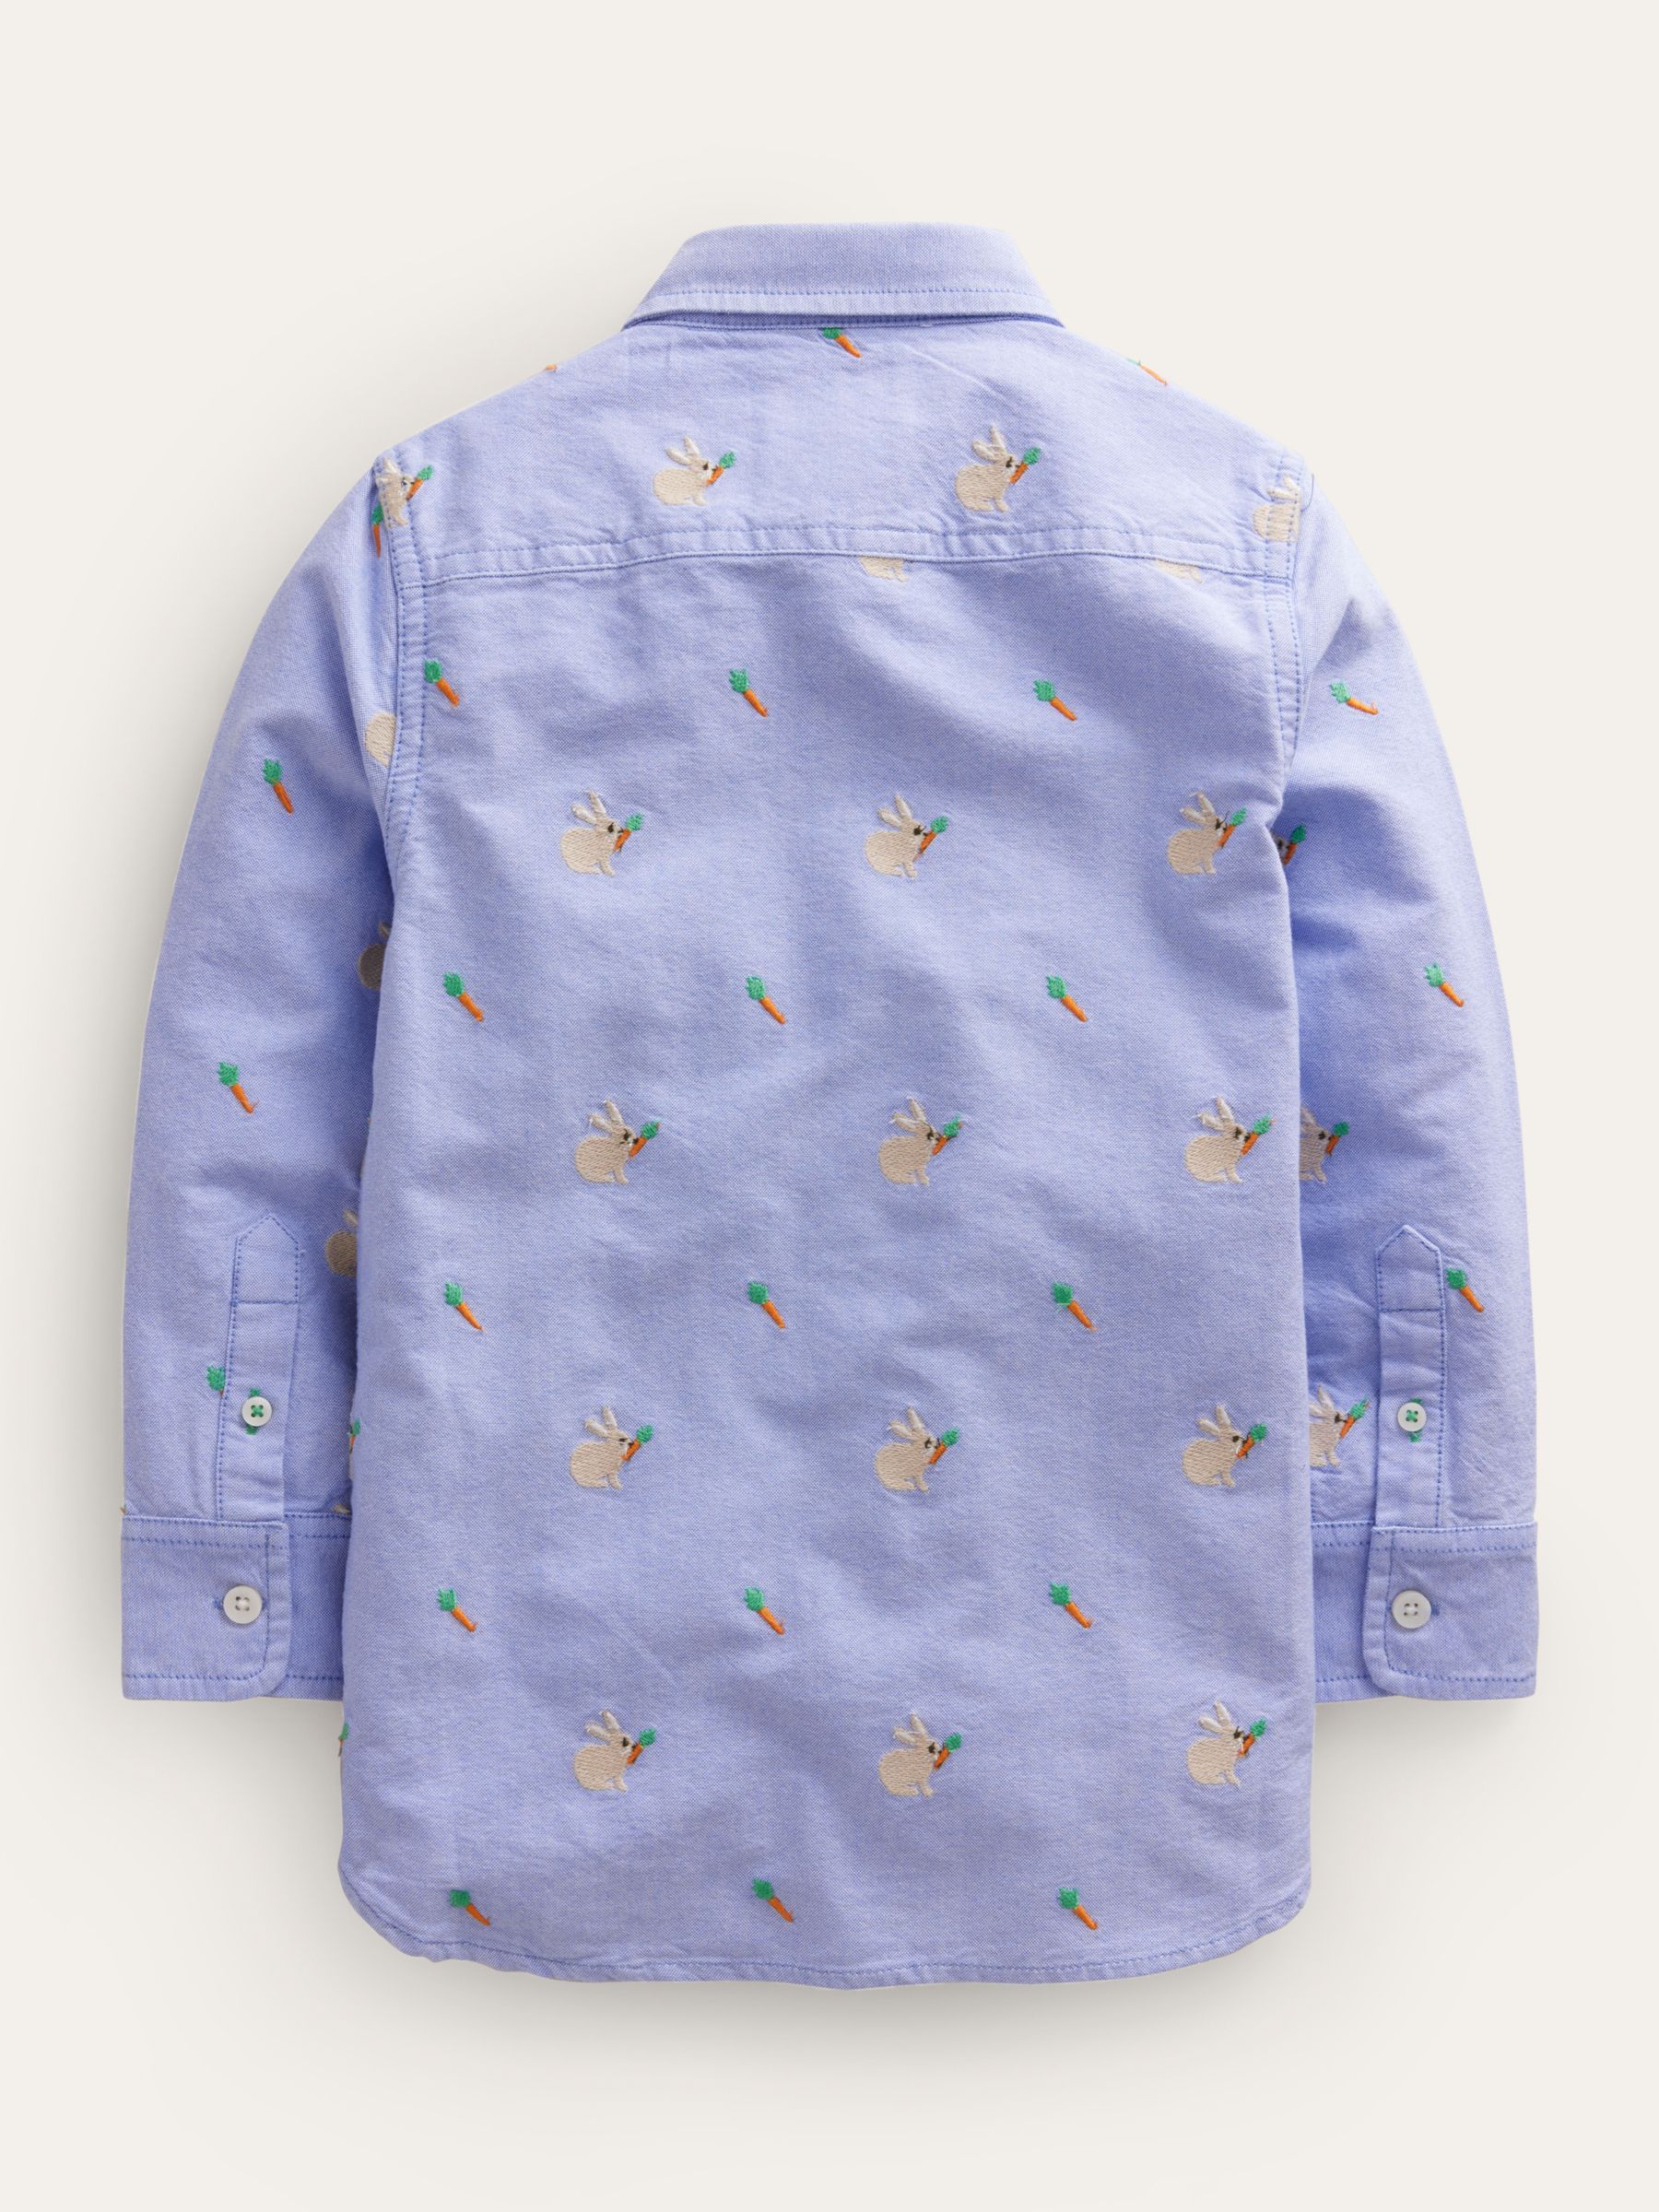 Mini Boden Kids' Embroidered Bunny Oxford Shirt, Blue, 3-4 years